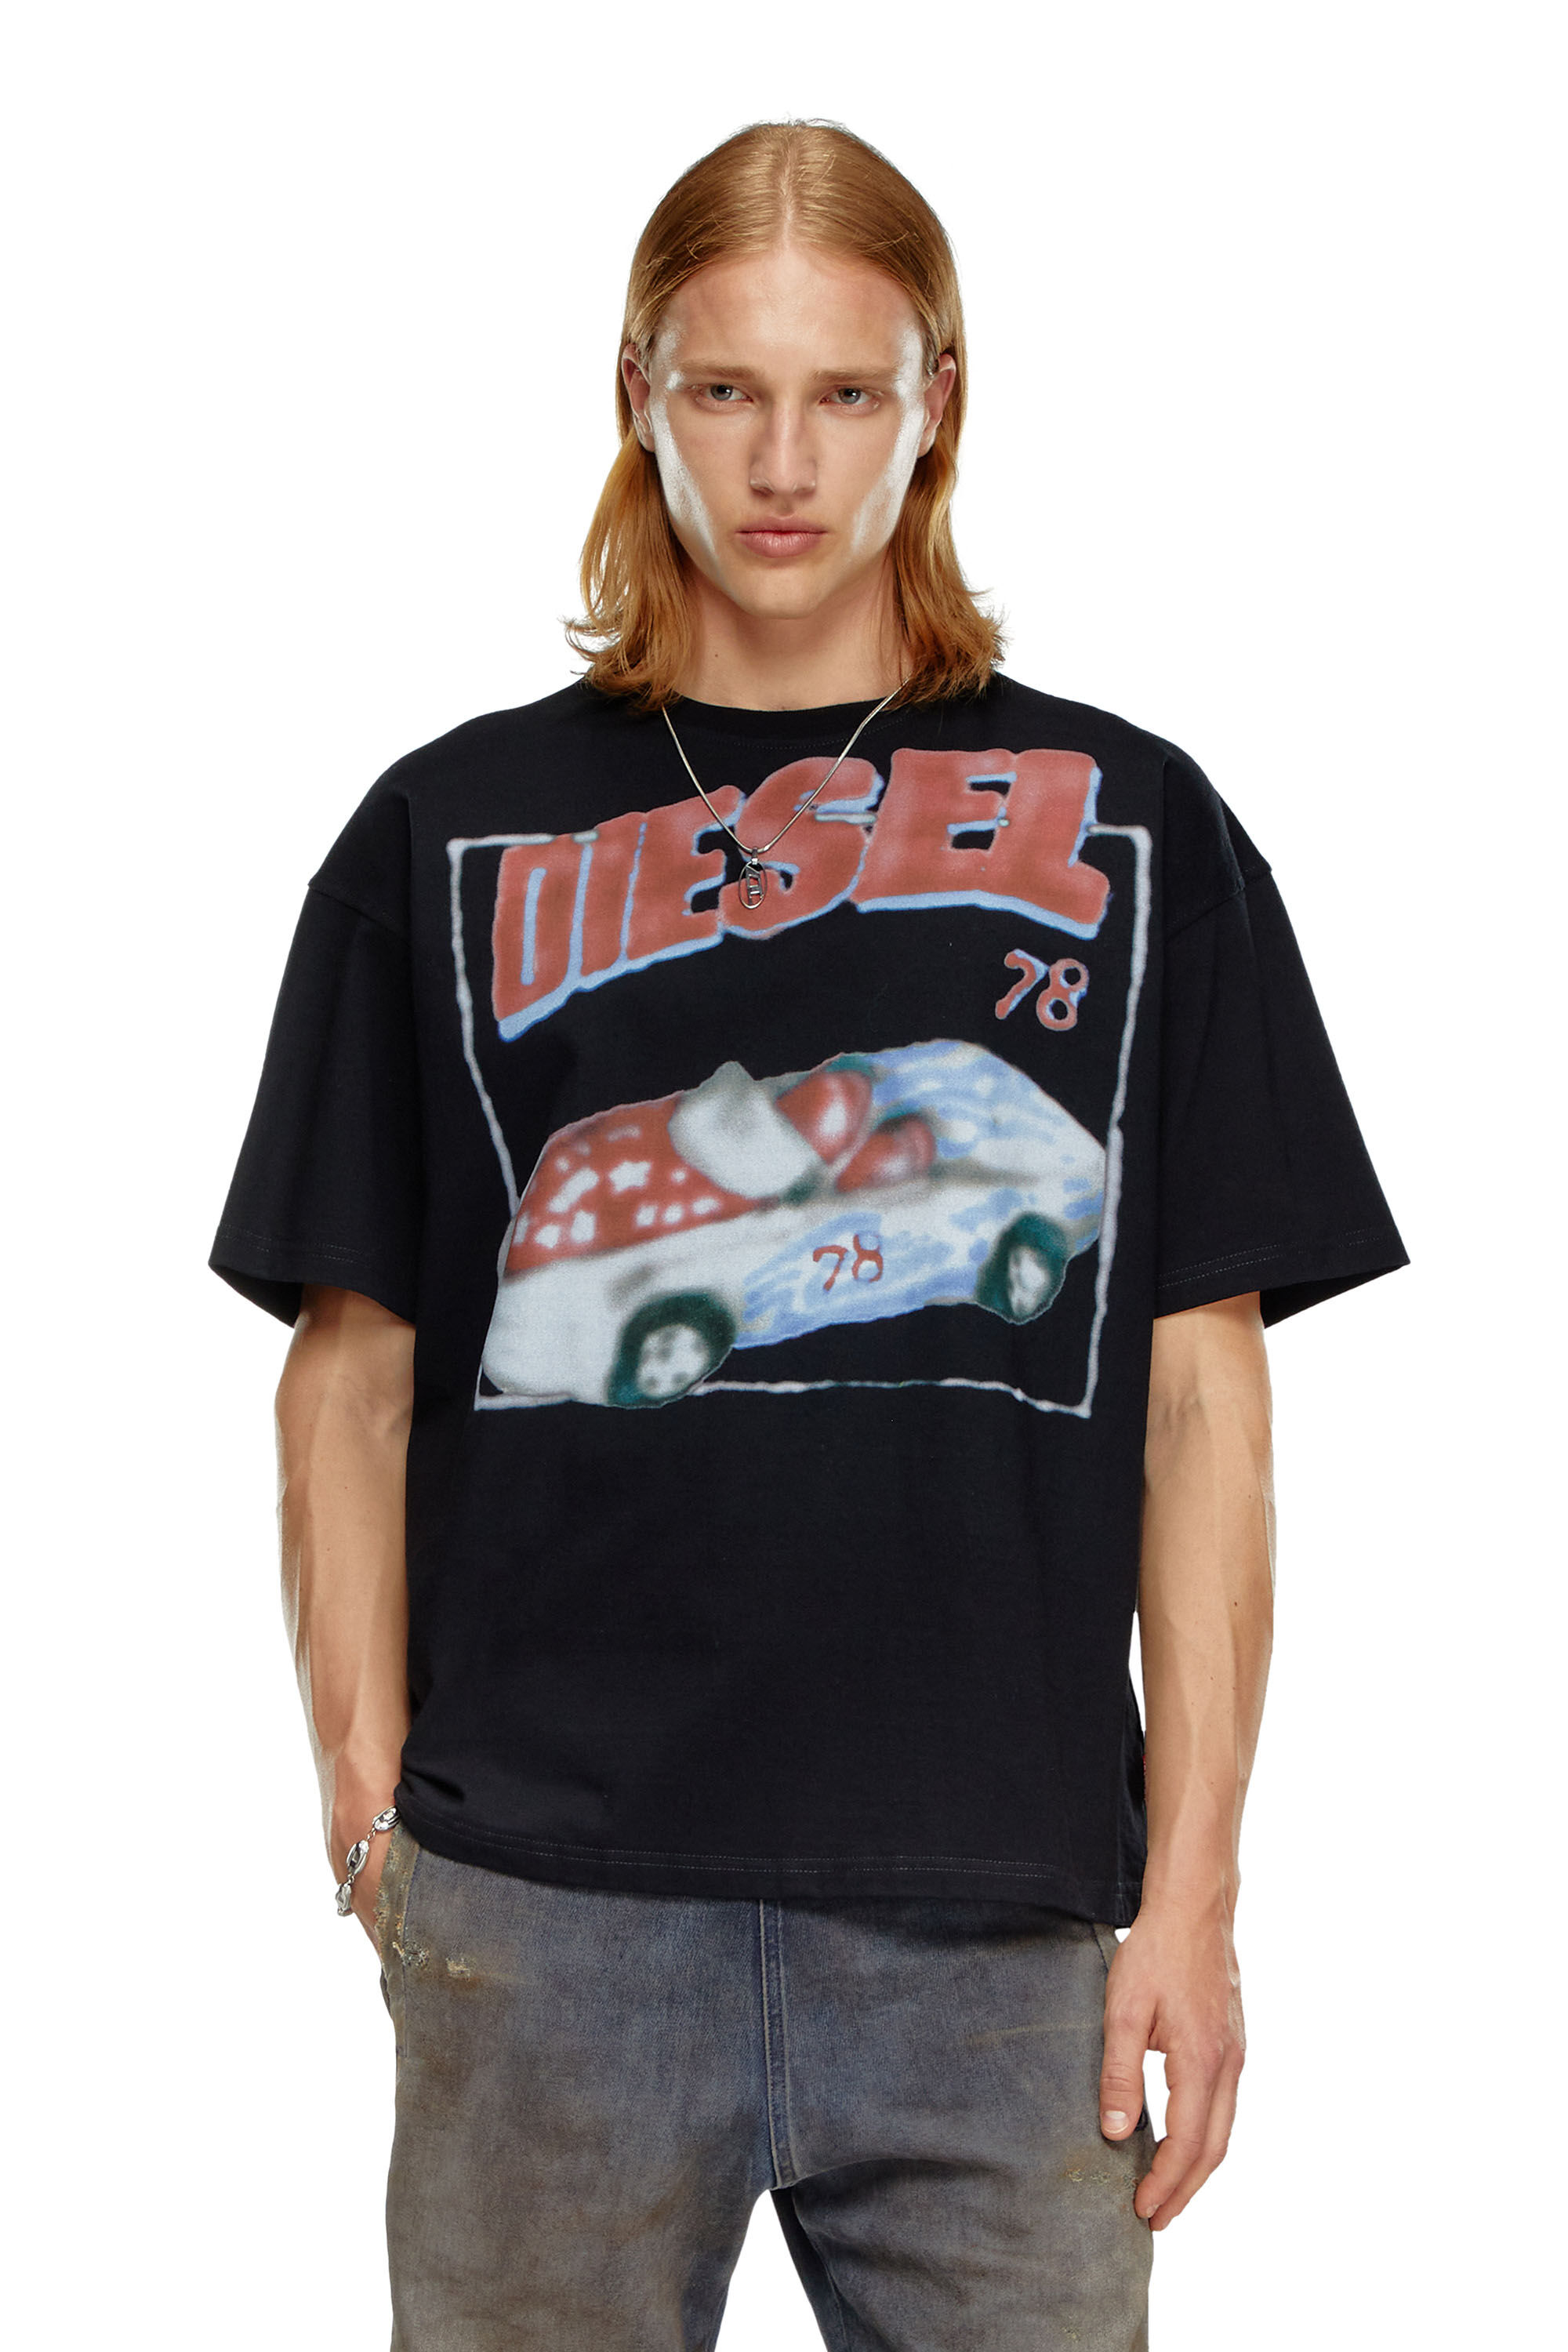 Diesel - T-BOXT-Q17, Man T-shirt with car print in Black - Image 3